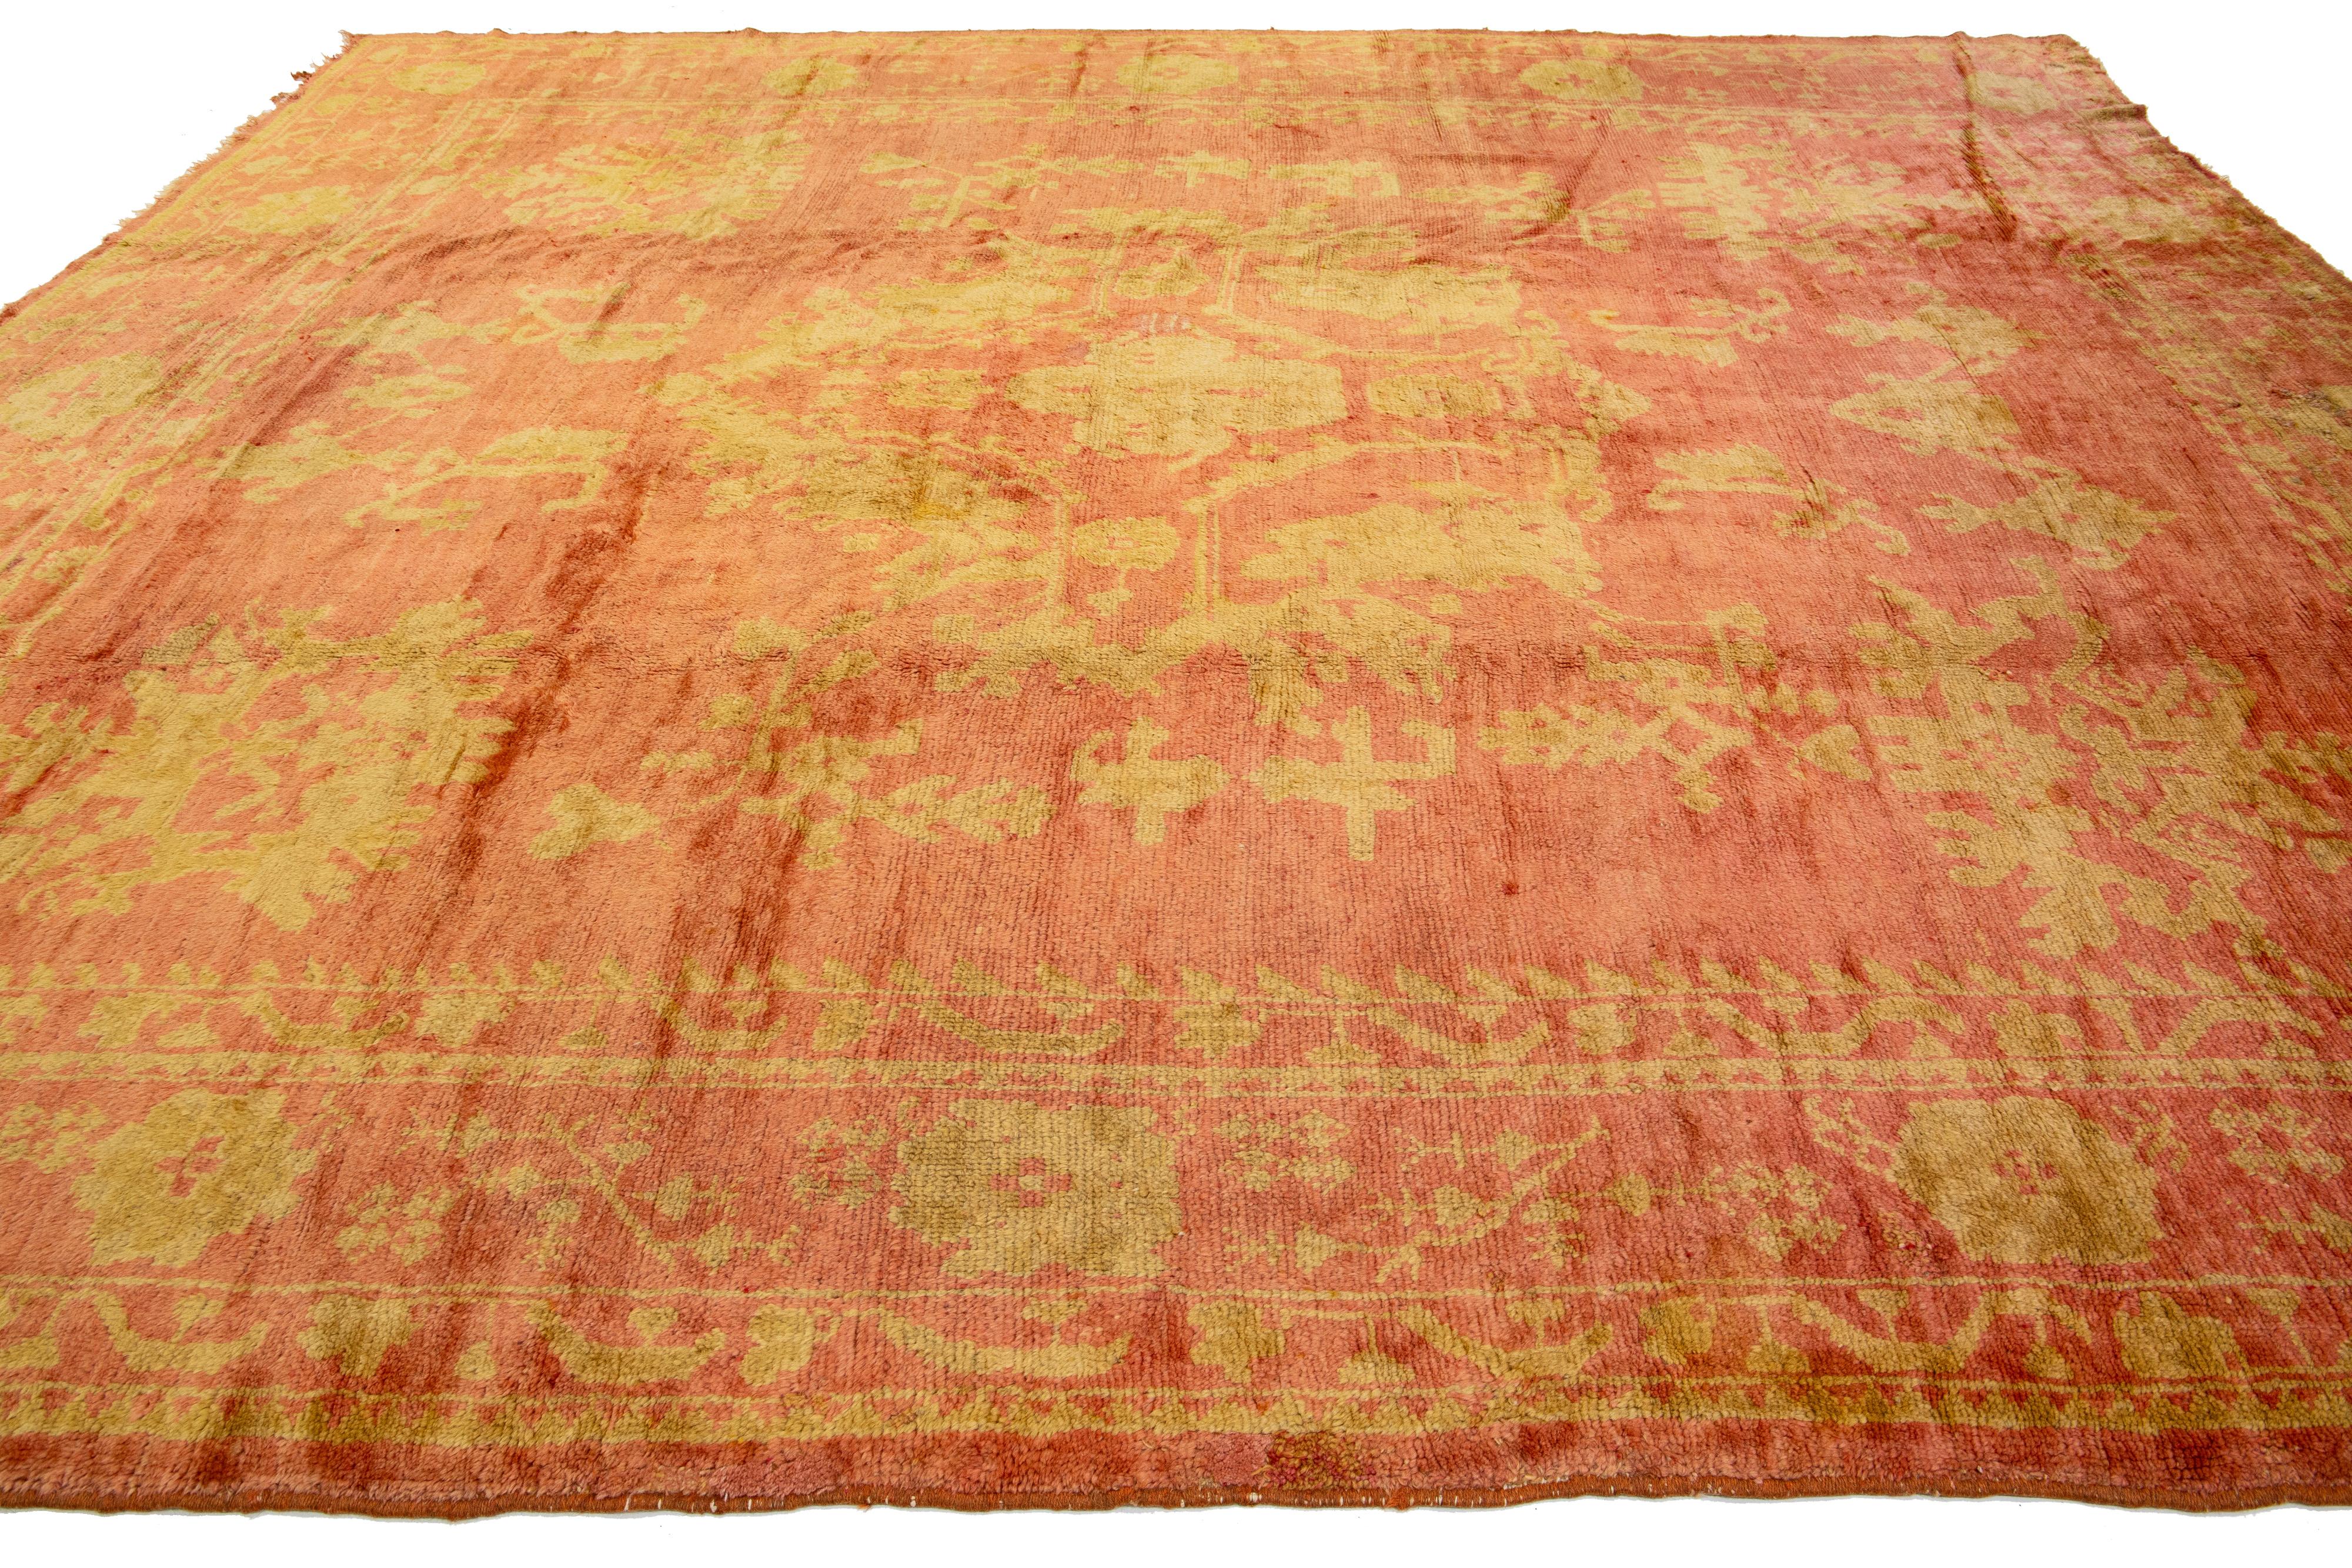 20th Century 1910s Antique Oushak Turkish Wool Rug In Terracota Color with Allover Design  For Sale